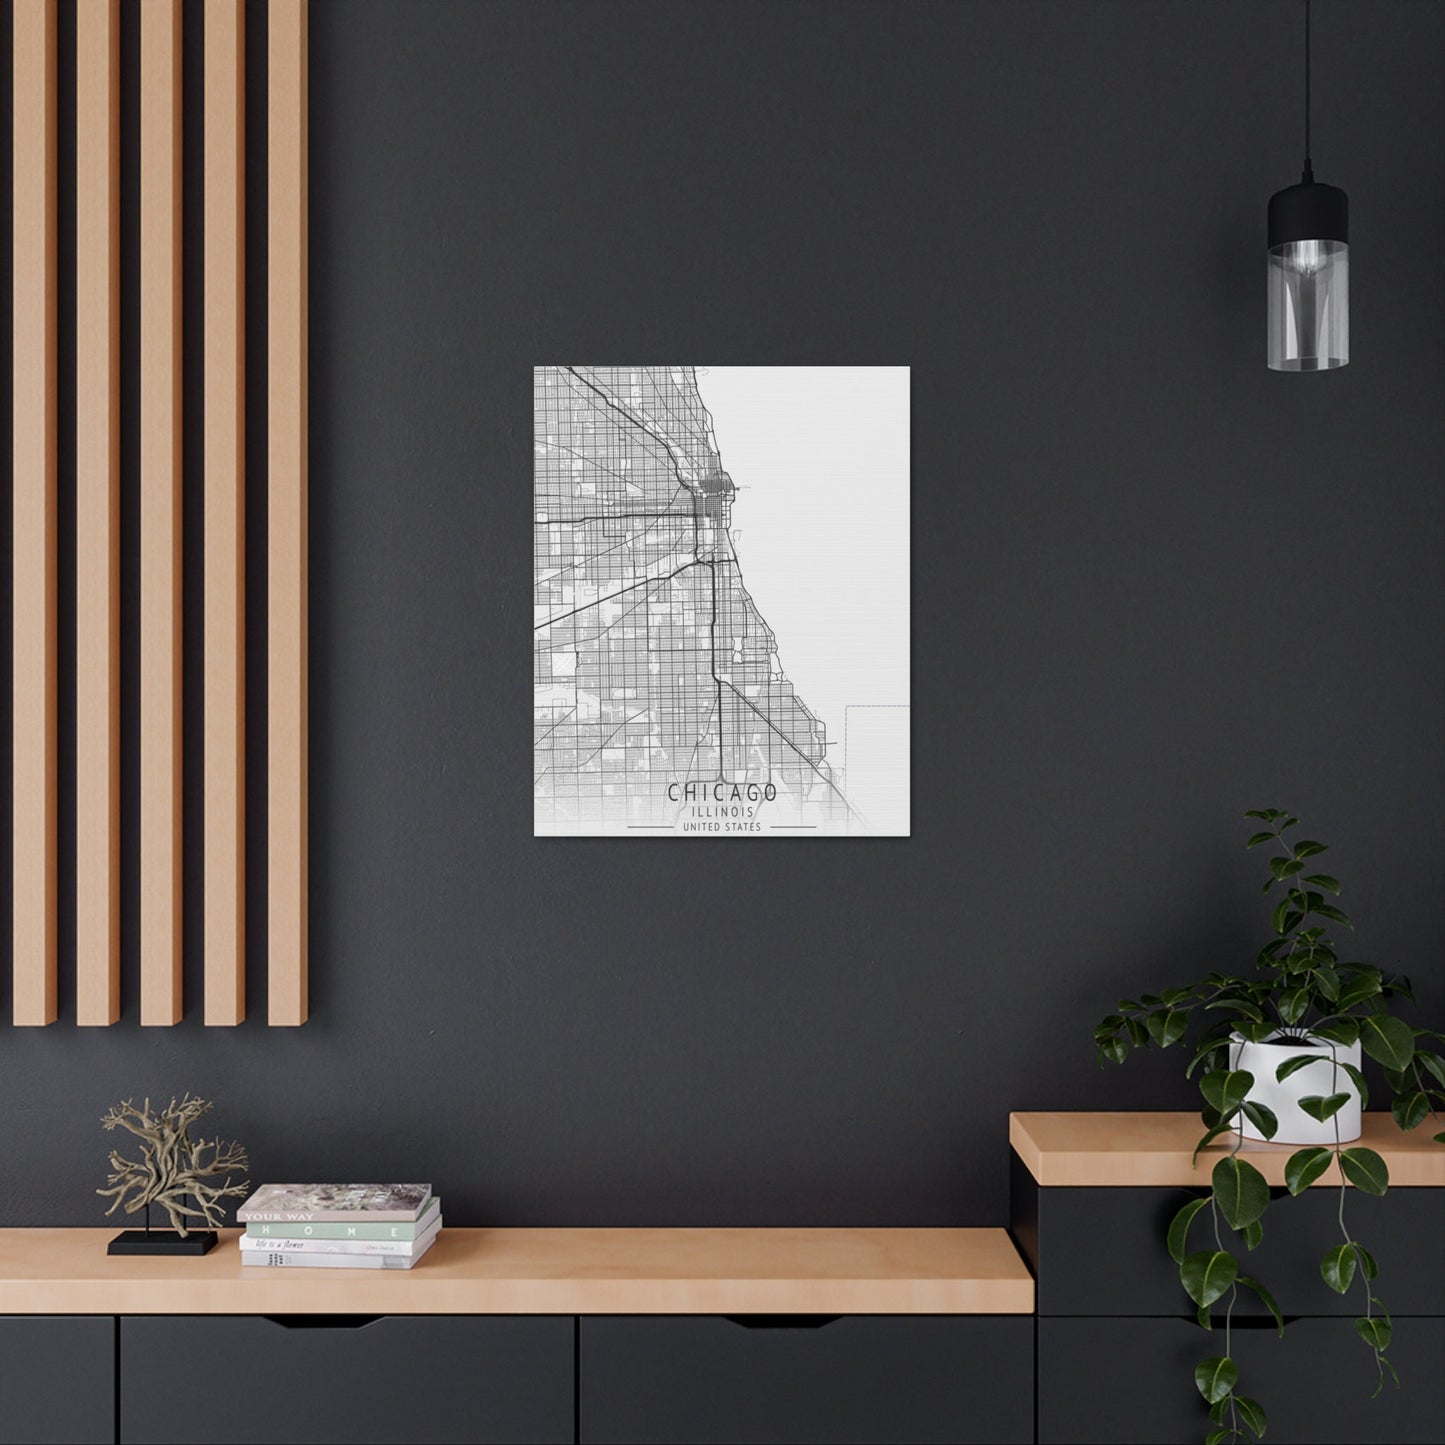 Stunning Large Vertical Chicago City Map: Perfect Wall Art for Your Home Decor